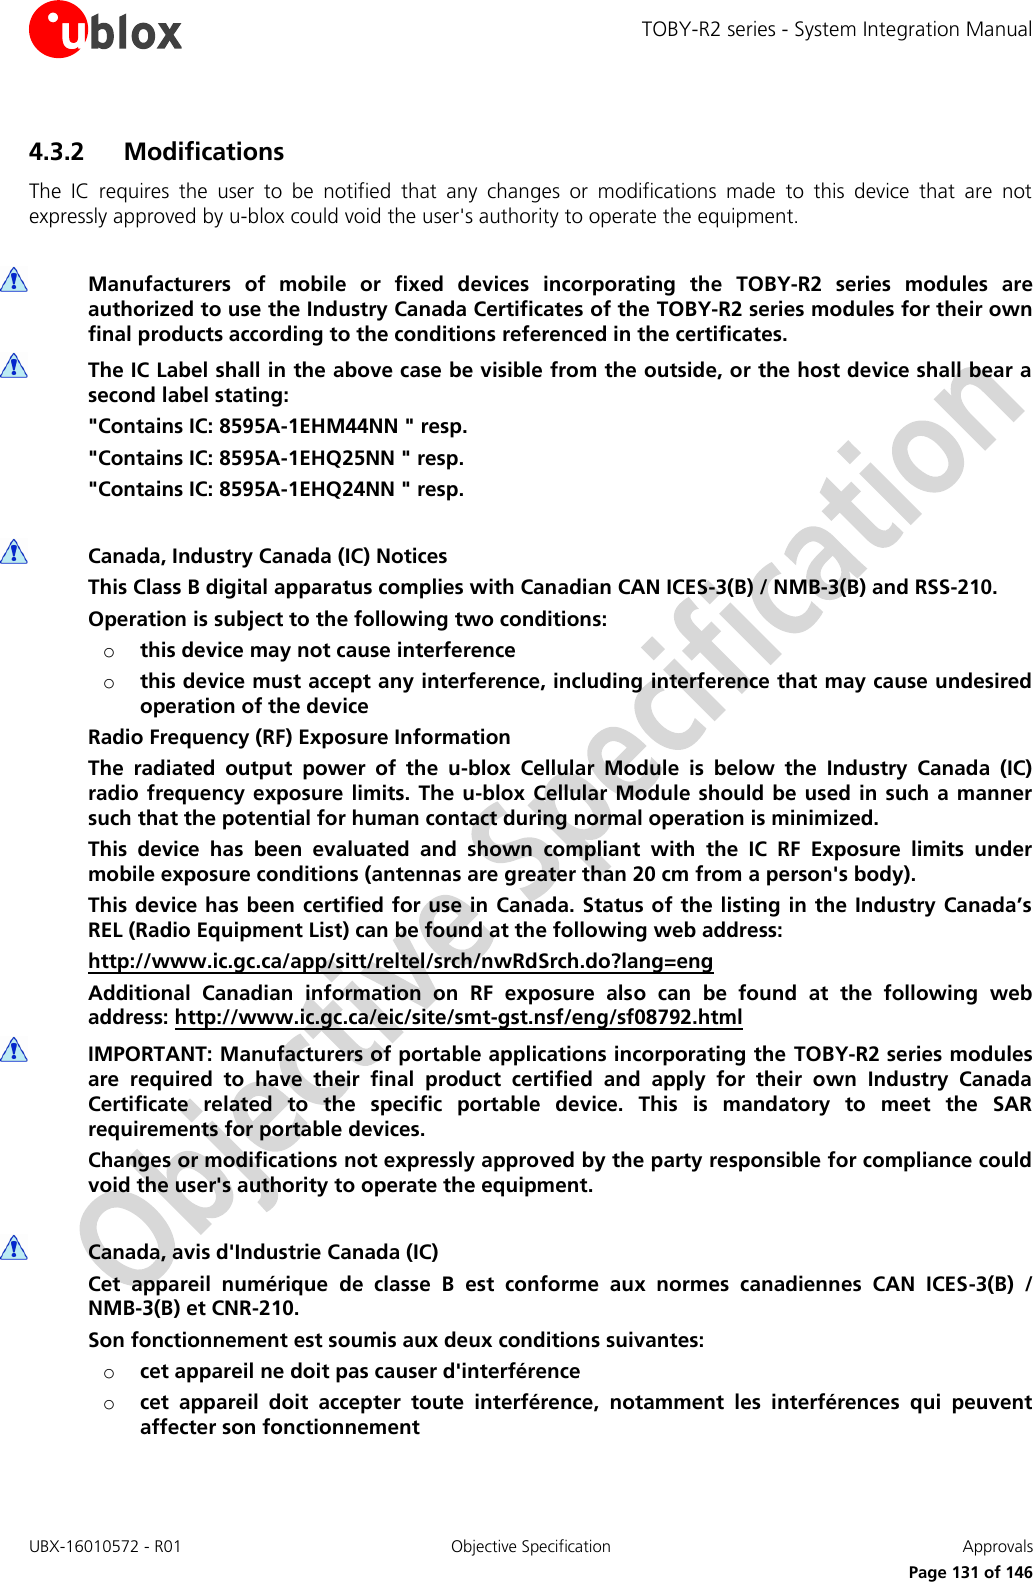 TOBY-R2 series - System Integration Manual UBX-16010572 - R01  Objective Specification  Approvals     Page 131 of 146 4.3.2 Modifications The  IC  requires  the  user  to  be  notified  that  any  changes  or  modifications  made  to  this  device  that  are  not expressly approved by u-blox could void the user&apos;s authority to operate the equipment.   Manufacturers  of  mobile  or  fixed  devices  incorporating  the  TOBY-R2  series  modules  are authorized to use the Industry Canada Certificates of the TOBY-R2 series modules for their own final products according to the conditions referenced in the certificates.  The IC Label shall in the above case be visible from the outside, or the host device shall bear a second label stating: &quot;Contains IC: 8595A-1EHM44NN &quot; resp. &quot;Contains IC: 8595A-1EHQ25NN &quot; resp. &quot;Contains IC: 8595A-1EHQ24NN &quot; resp.   Canada, Industry Canada (IC) Notices This Class B digital apparatus complies with Canadian CAN ICES-3(B) / NMB-3(B) and RSS-210. Operation is subject to the following two conditions: o this device may not cause interference o this device must accept any interference, including interference that may cause undesired operation of the device Radio Frequency (RF) Exposure Information The  radiated  output  power  of  the  u-blox  Cellular  Module  is  below  the  Industry  Canada  (IC) radio frequency  exposure limits.  The  u-blox Cellular  Module should be used  in  such a manner such that the potential for human contact during normal operation is minimized. This  device  has  been  evaluated  and  shown  compliant  with  the  IC  RF  Exposure  limits  under mobile exposure conditions (antennas are greater than 20 cm from a person&apos;s body). This device has been certified for use in Canada. Status of the listing in the Industry Canada’s REL (Radio Equipment List) can be found at the following web address: http://www.ic.gc.ca/app/sitt/reltel/srch/nwRdSrch.do?lang=eng Additional  Canadian  information  on  RF  exposure  also  can  be  found  at  the  following  web address: http://www.ic.gc.ca/eic/site/smt-gst.nsf/eng/sf08792.html  IMPORTANT: Manufacturers of portable applications incorporating the TOBY-R2 series modules are  required  to  have  their  final  product  certified  and  apply  for  their  own  Industry  Canada Certificate  related  to  the  specific  portable  device.  This  is  mandatory  to  meet  the  SAR requirements for portable devices. Changes or modifications not expressly approved by the party responsible for compliance could void the user&apos;s authority to operate the equipment.   Canada, avis d&apos;Industrie Canada (IC) Cet  appareil  numérique  de  classe  B  est  conforme  aux  normes  canadiennes  CAN  ICES-3(B)  / NMB-3(B) et CNR-210. Son fonctionnement est soumis aux deux conditions suivantes: o cet appareil ne doit pas causer d&apos;interférence o cet  appareil  doit  accepter  toute  interférence,  notamment  les  interférences  qui  peuvent affecter son fonctionnement 